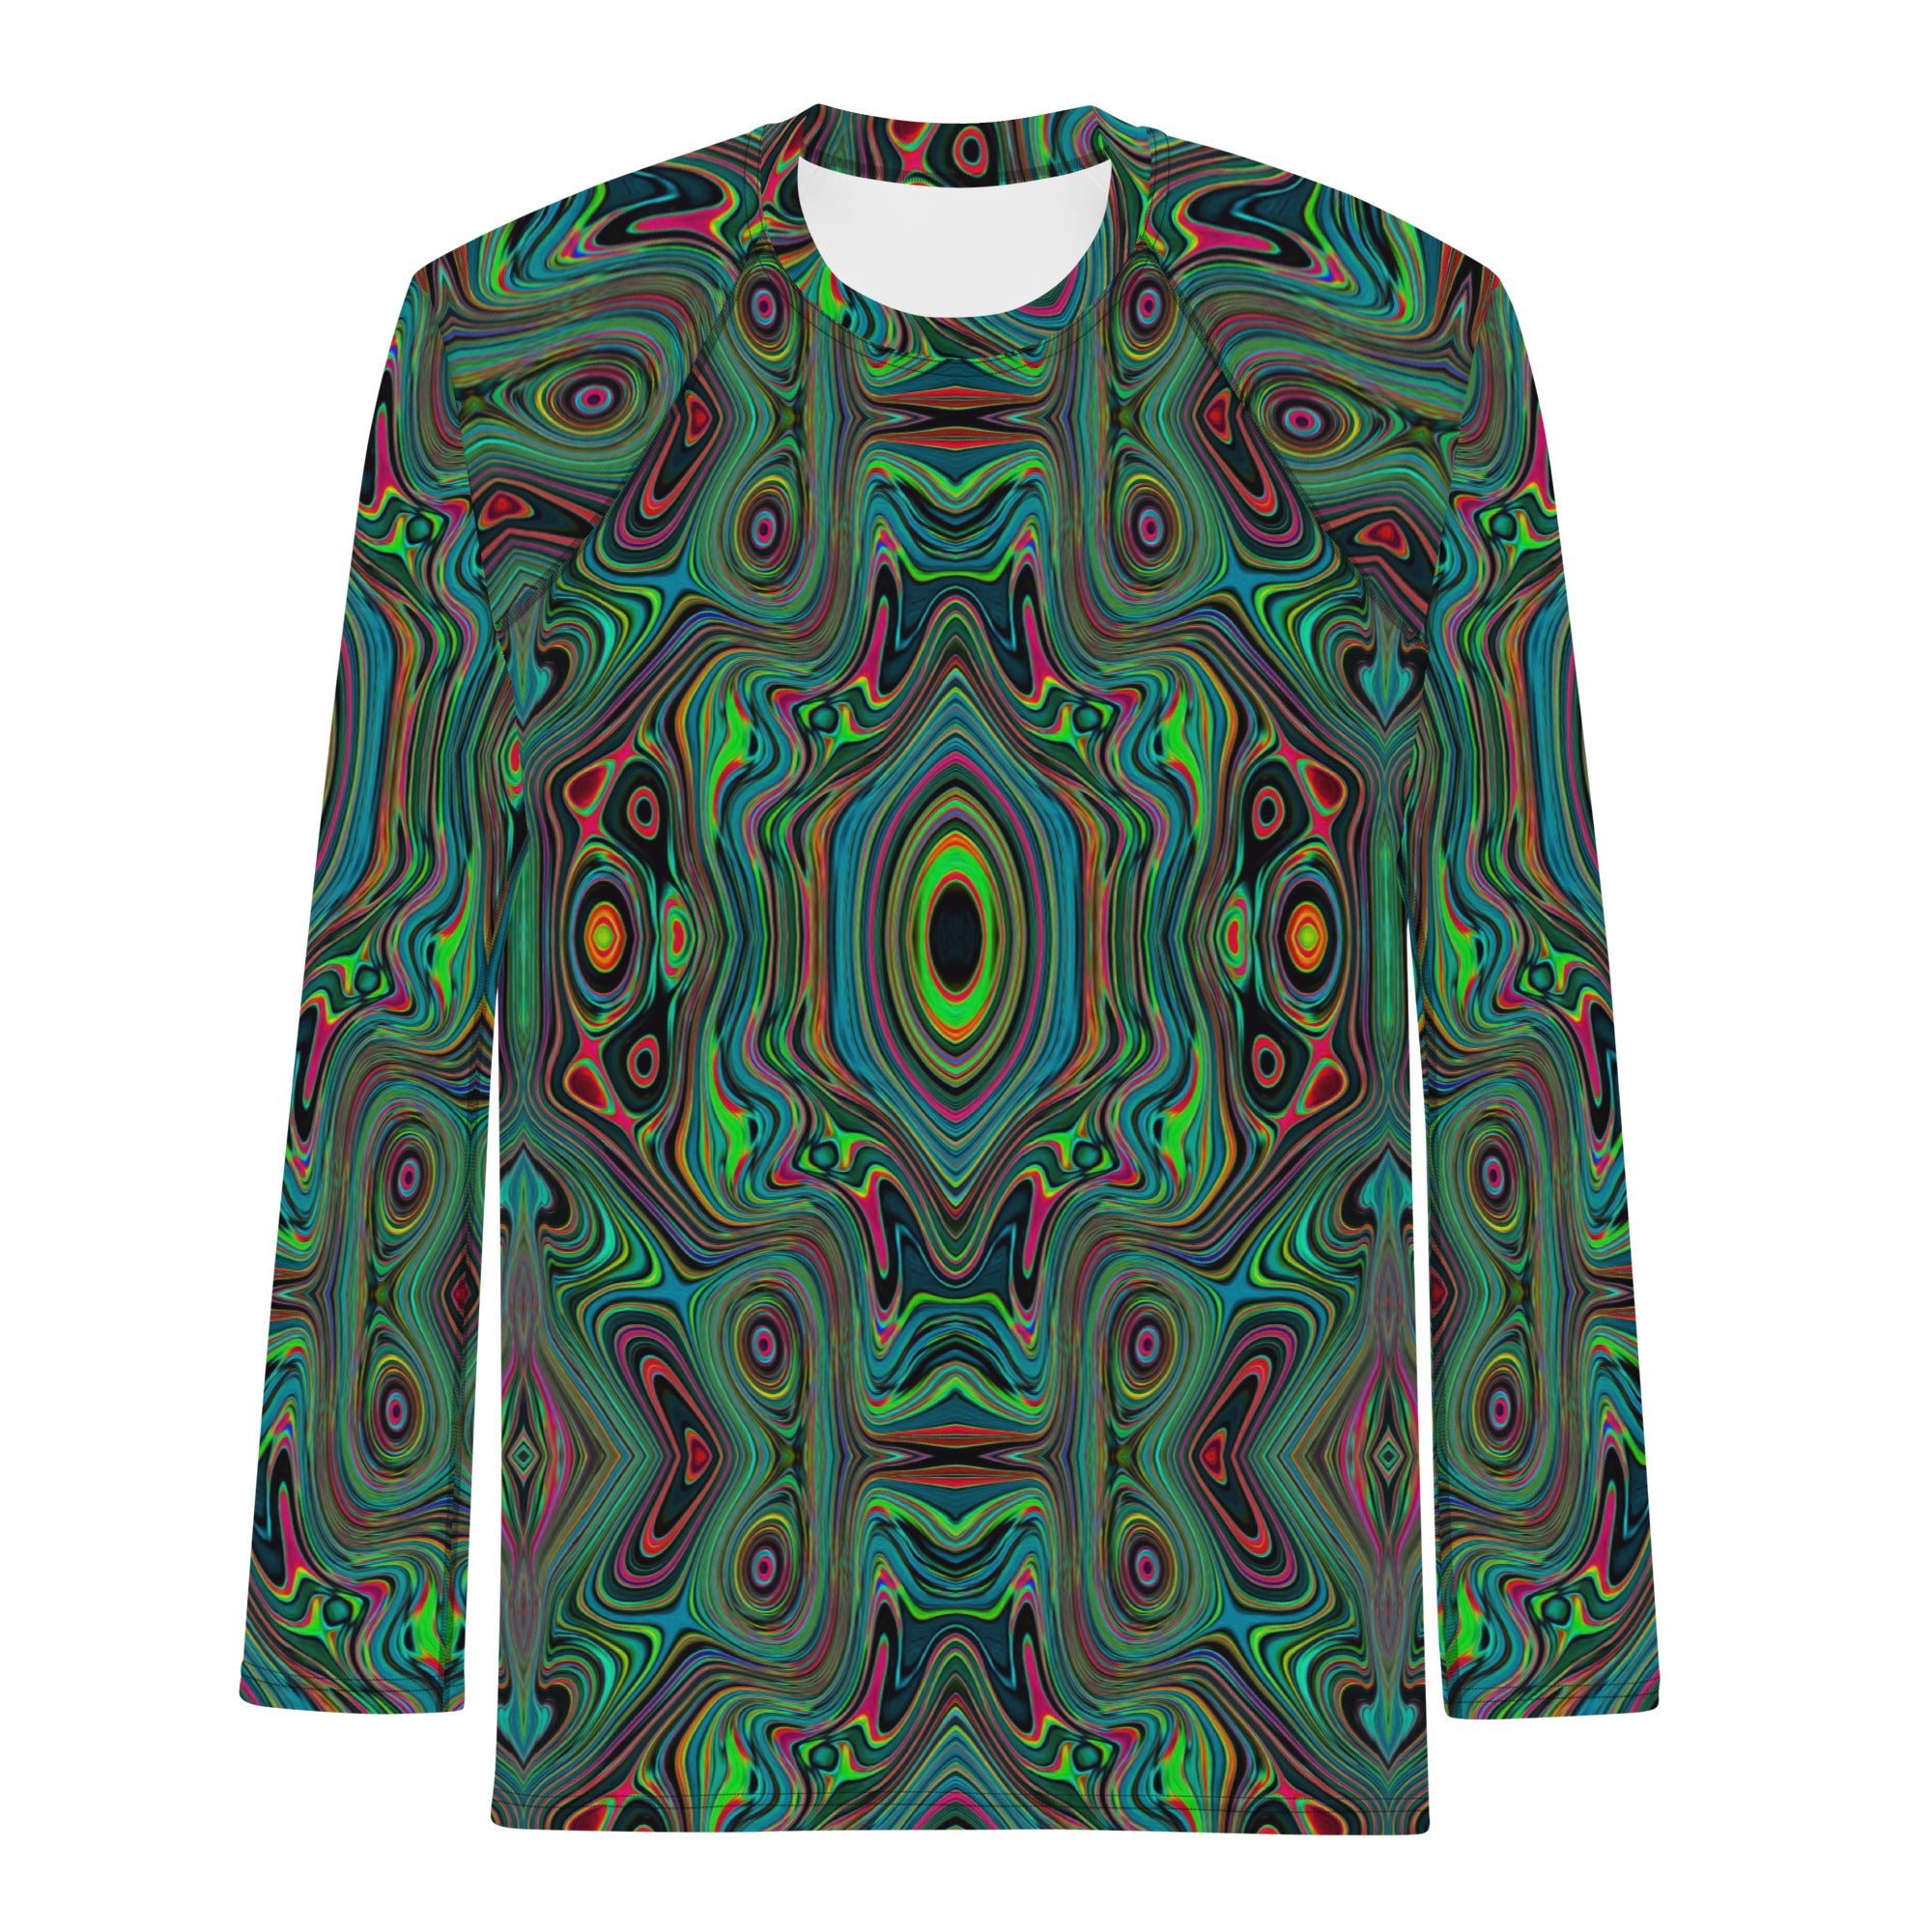 Men's Athletic Rash Guard Shirts, Trippy Retro Black and Lime Green Abstract Pattern